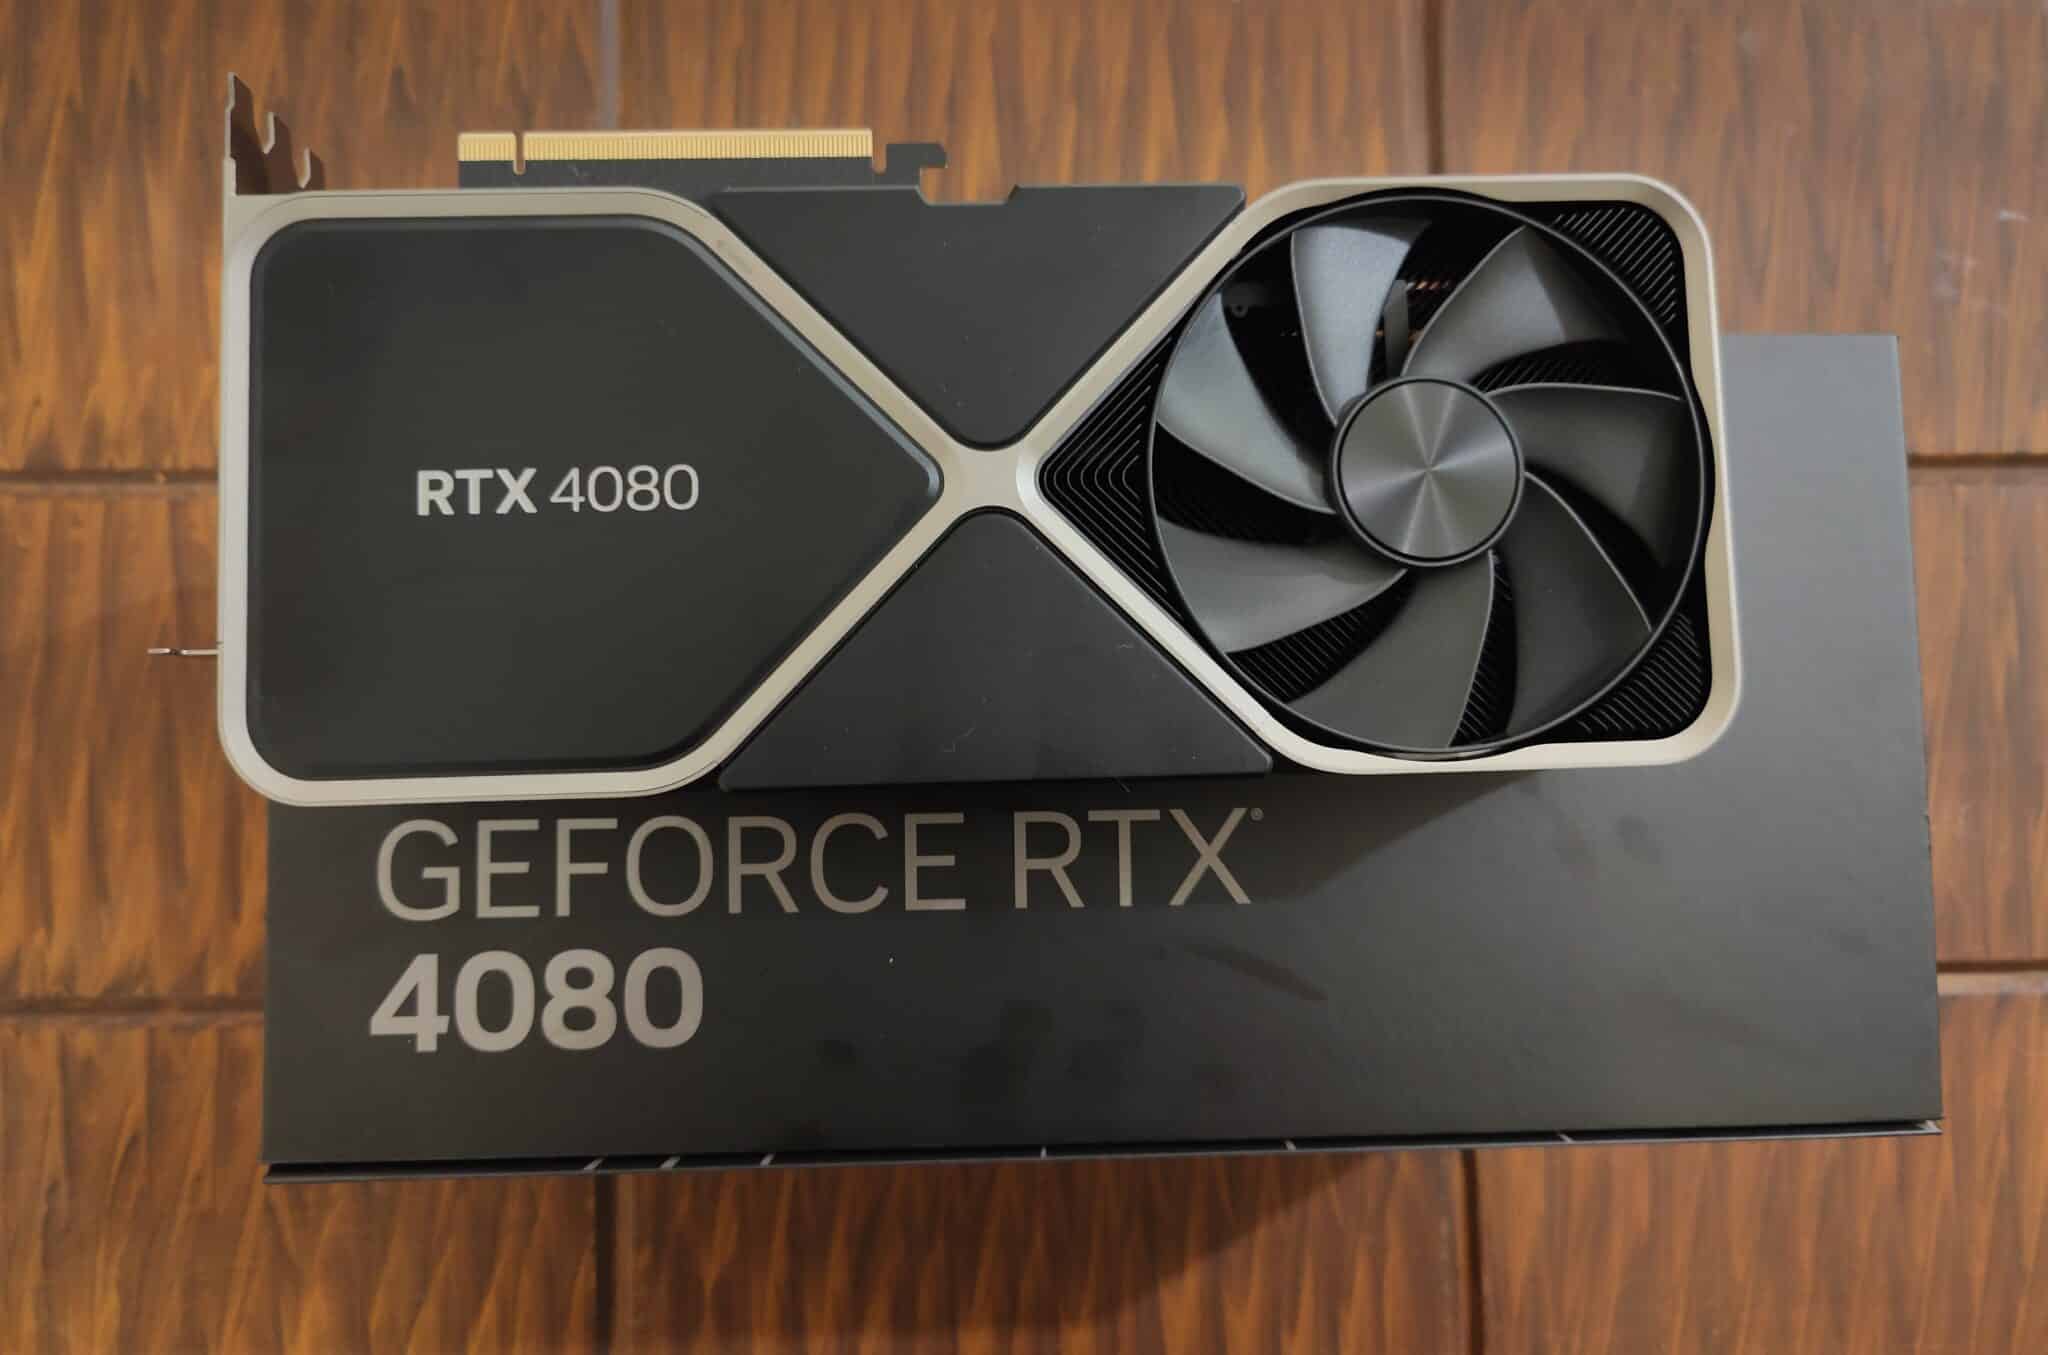 NVIDIA RTX 4080/4070 Ti Enter the List of Top 10 Most Sold GPUs